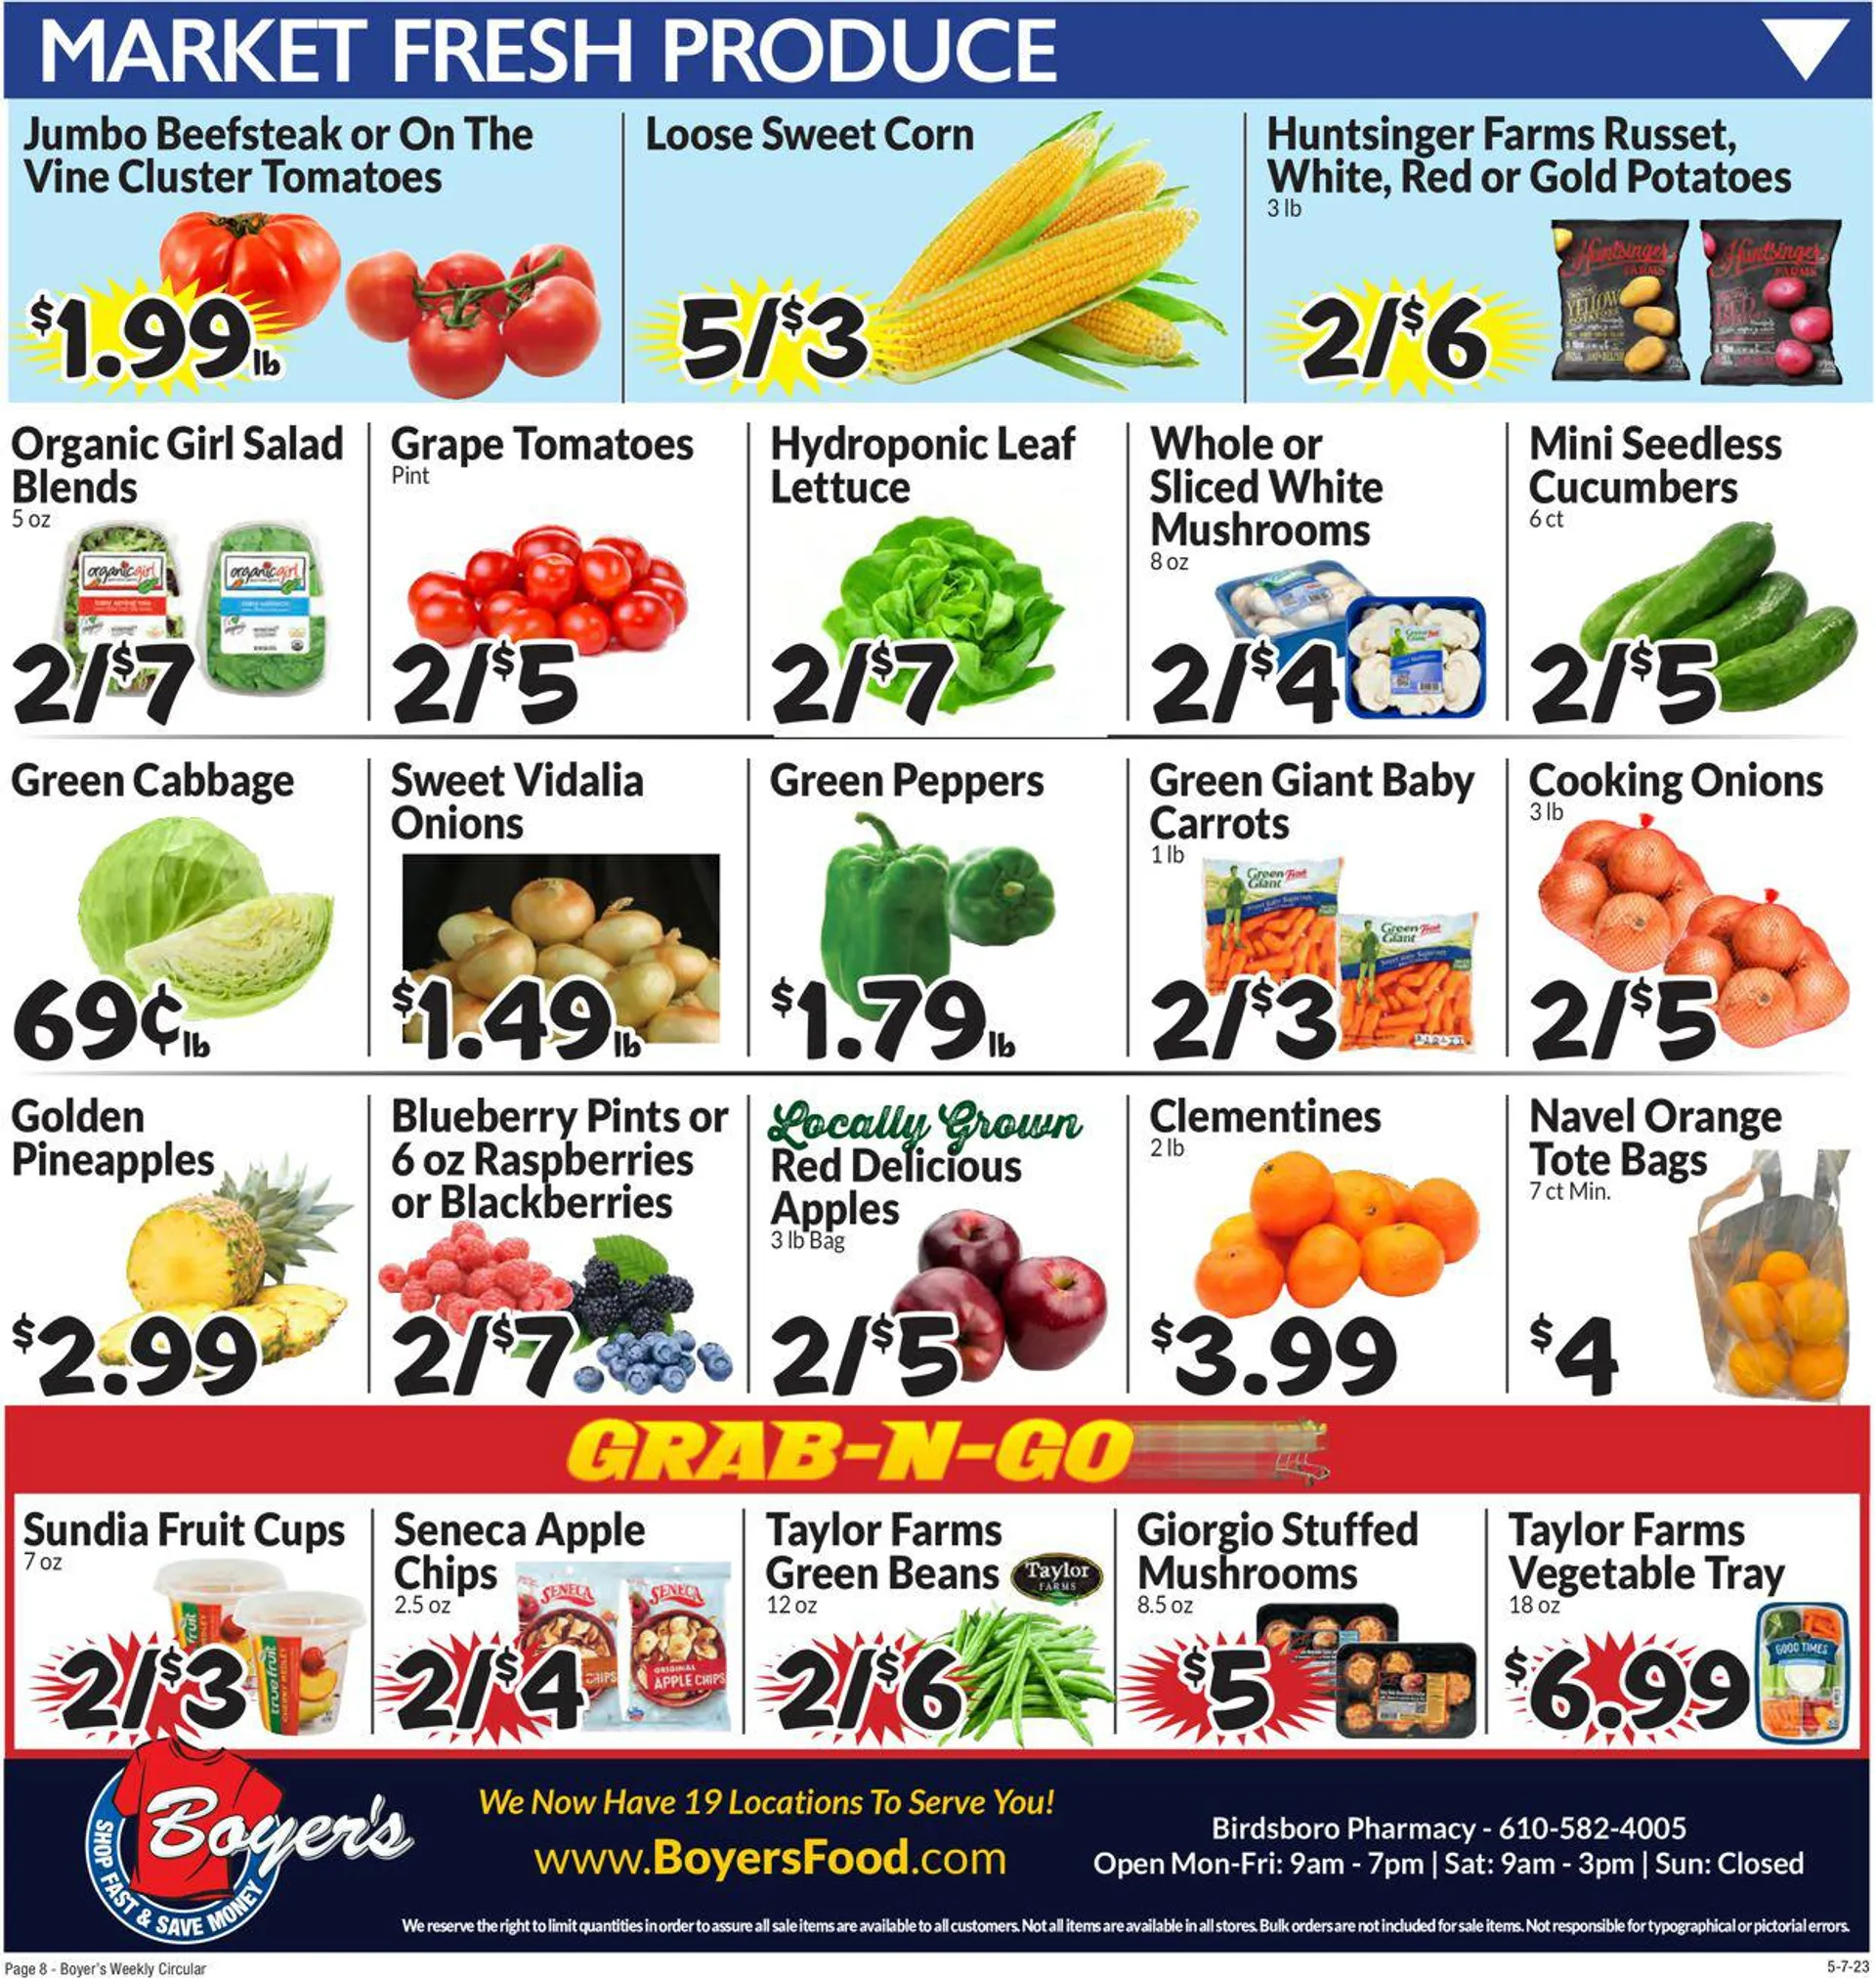 Boyers Food Markets Current weekly ad - 11